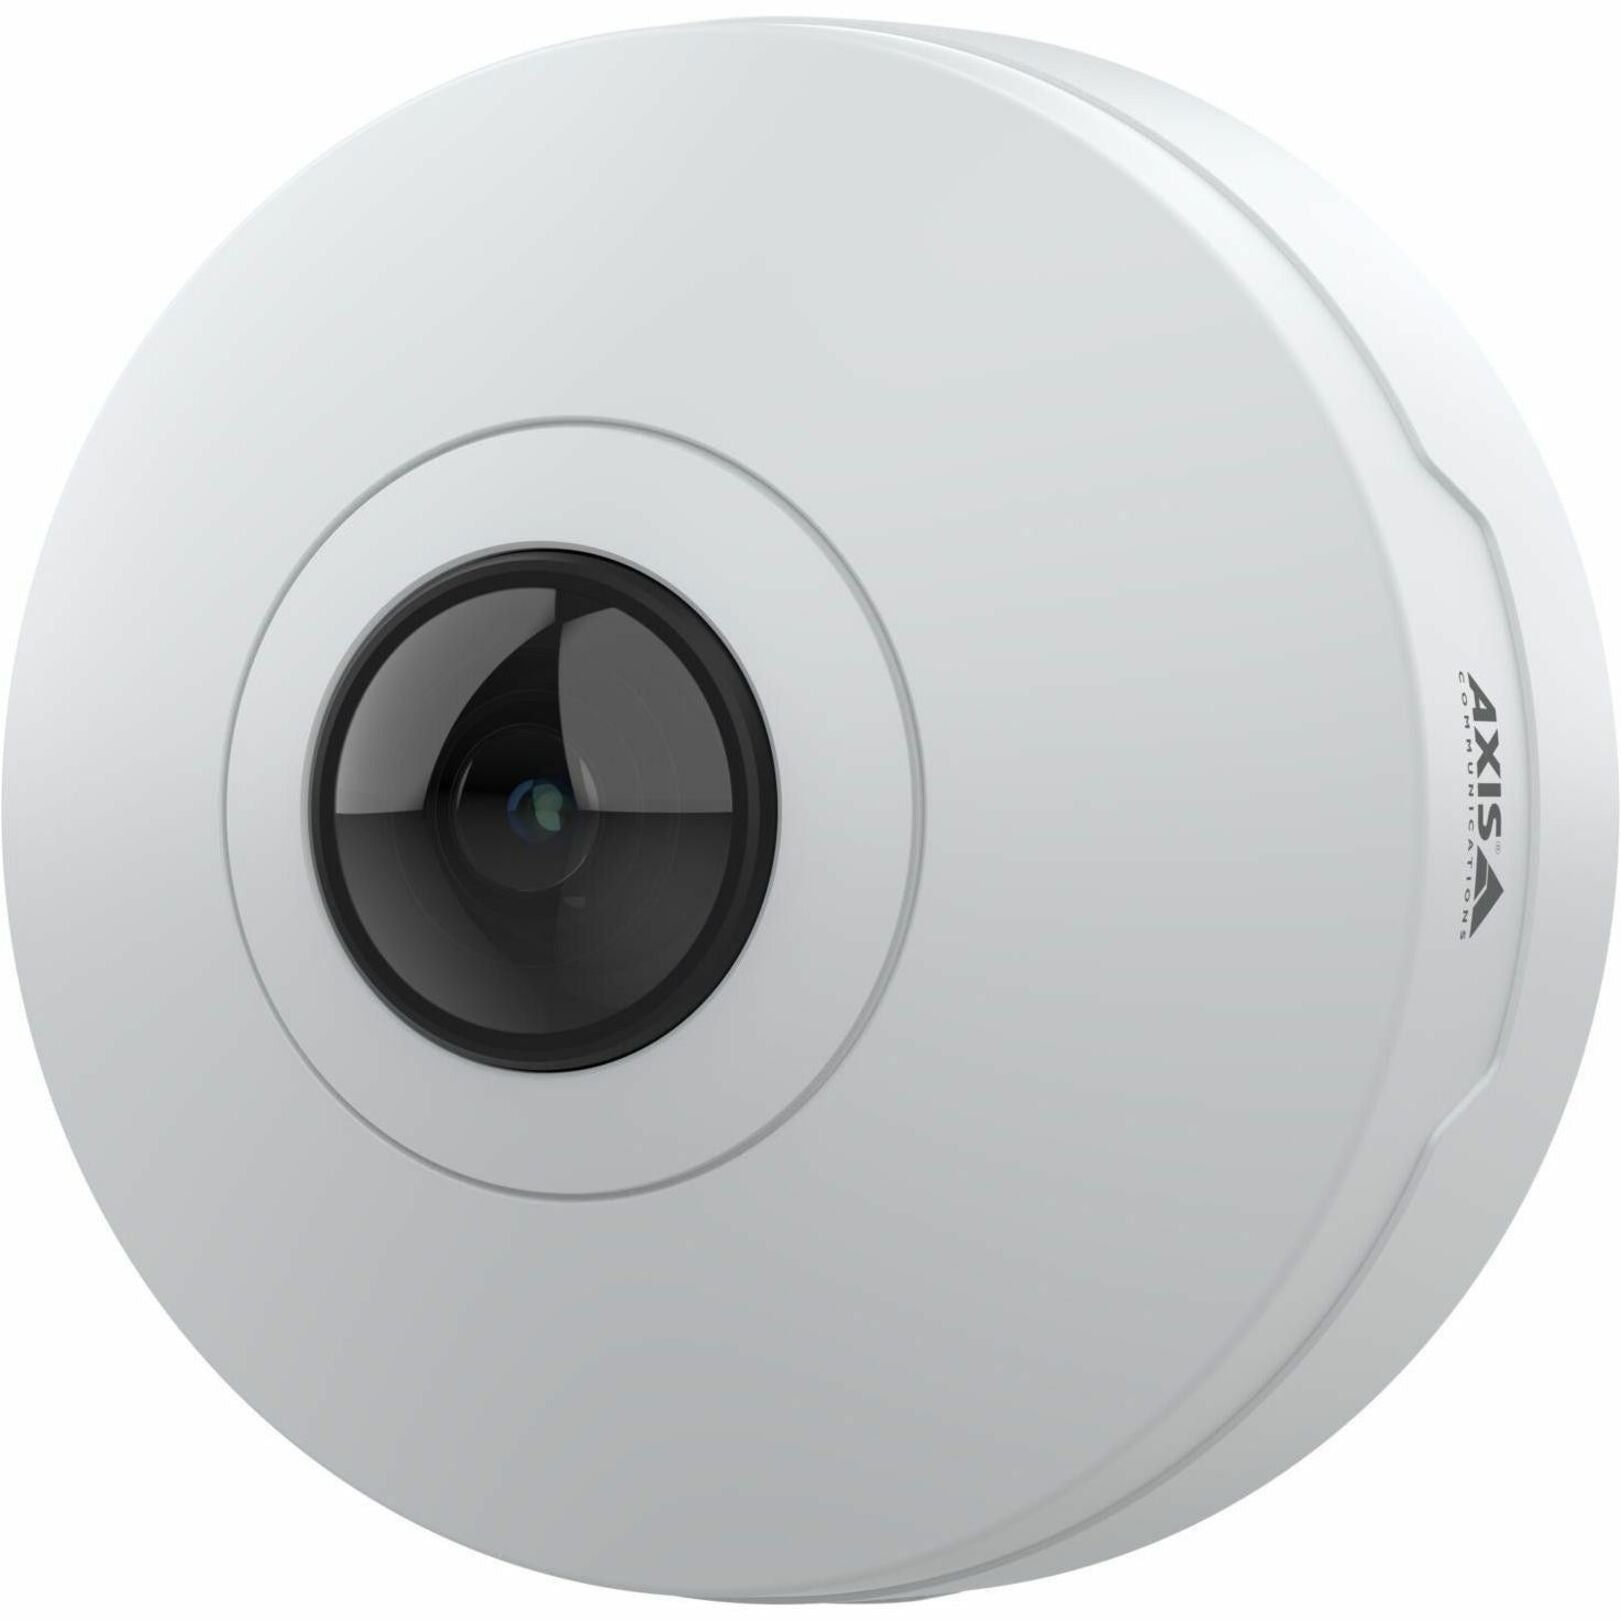 AXIS 02636-004 M4327-P Panoramic Camera, 6MP, Indoor, 182° Field of View, PoE